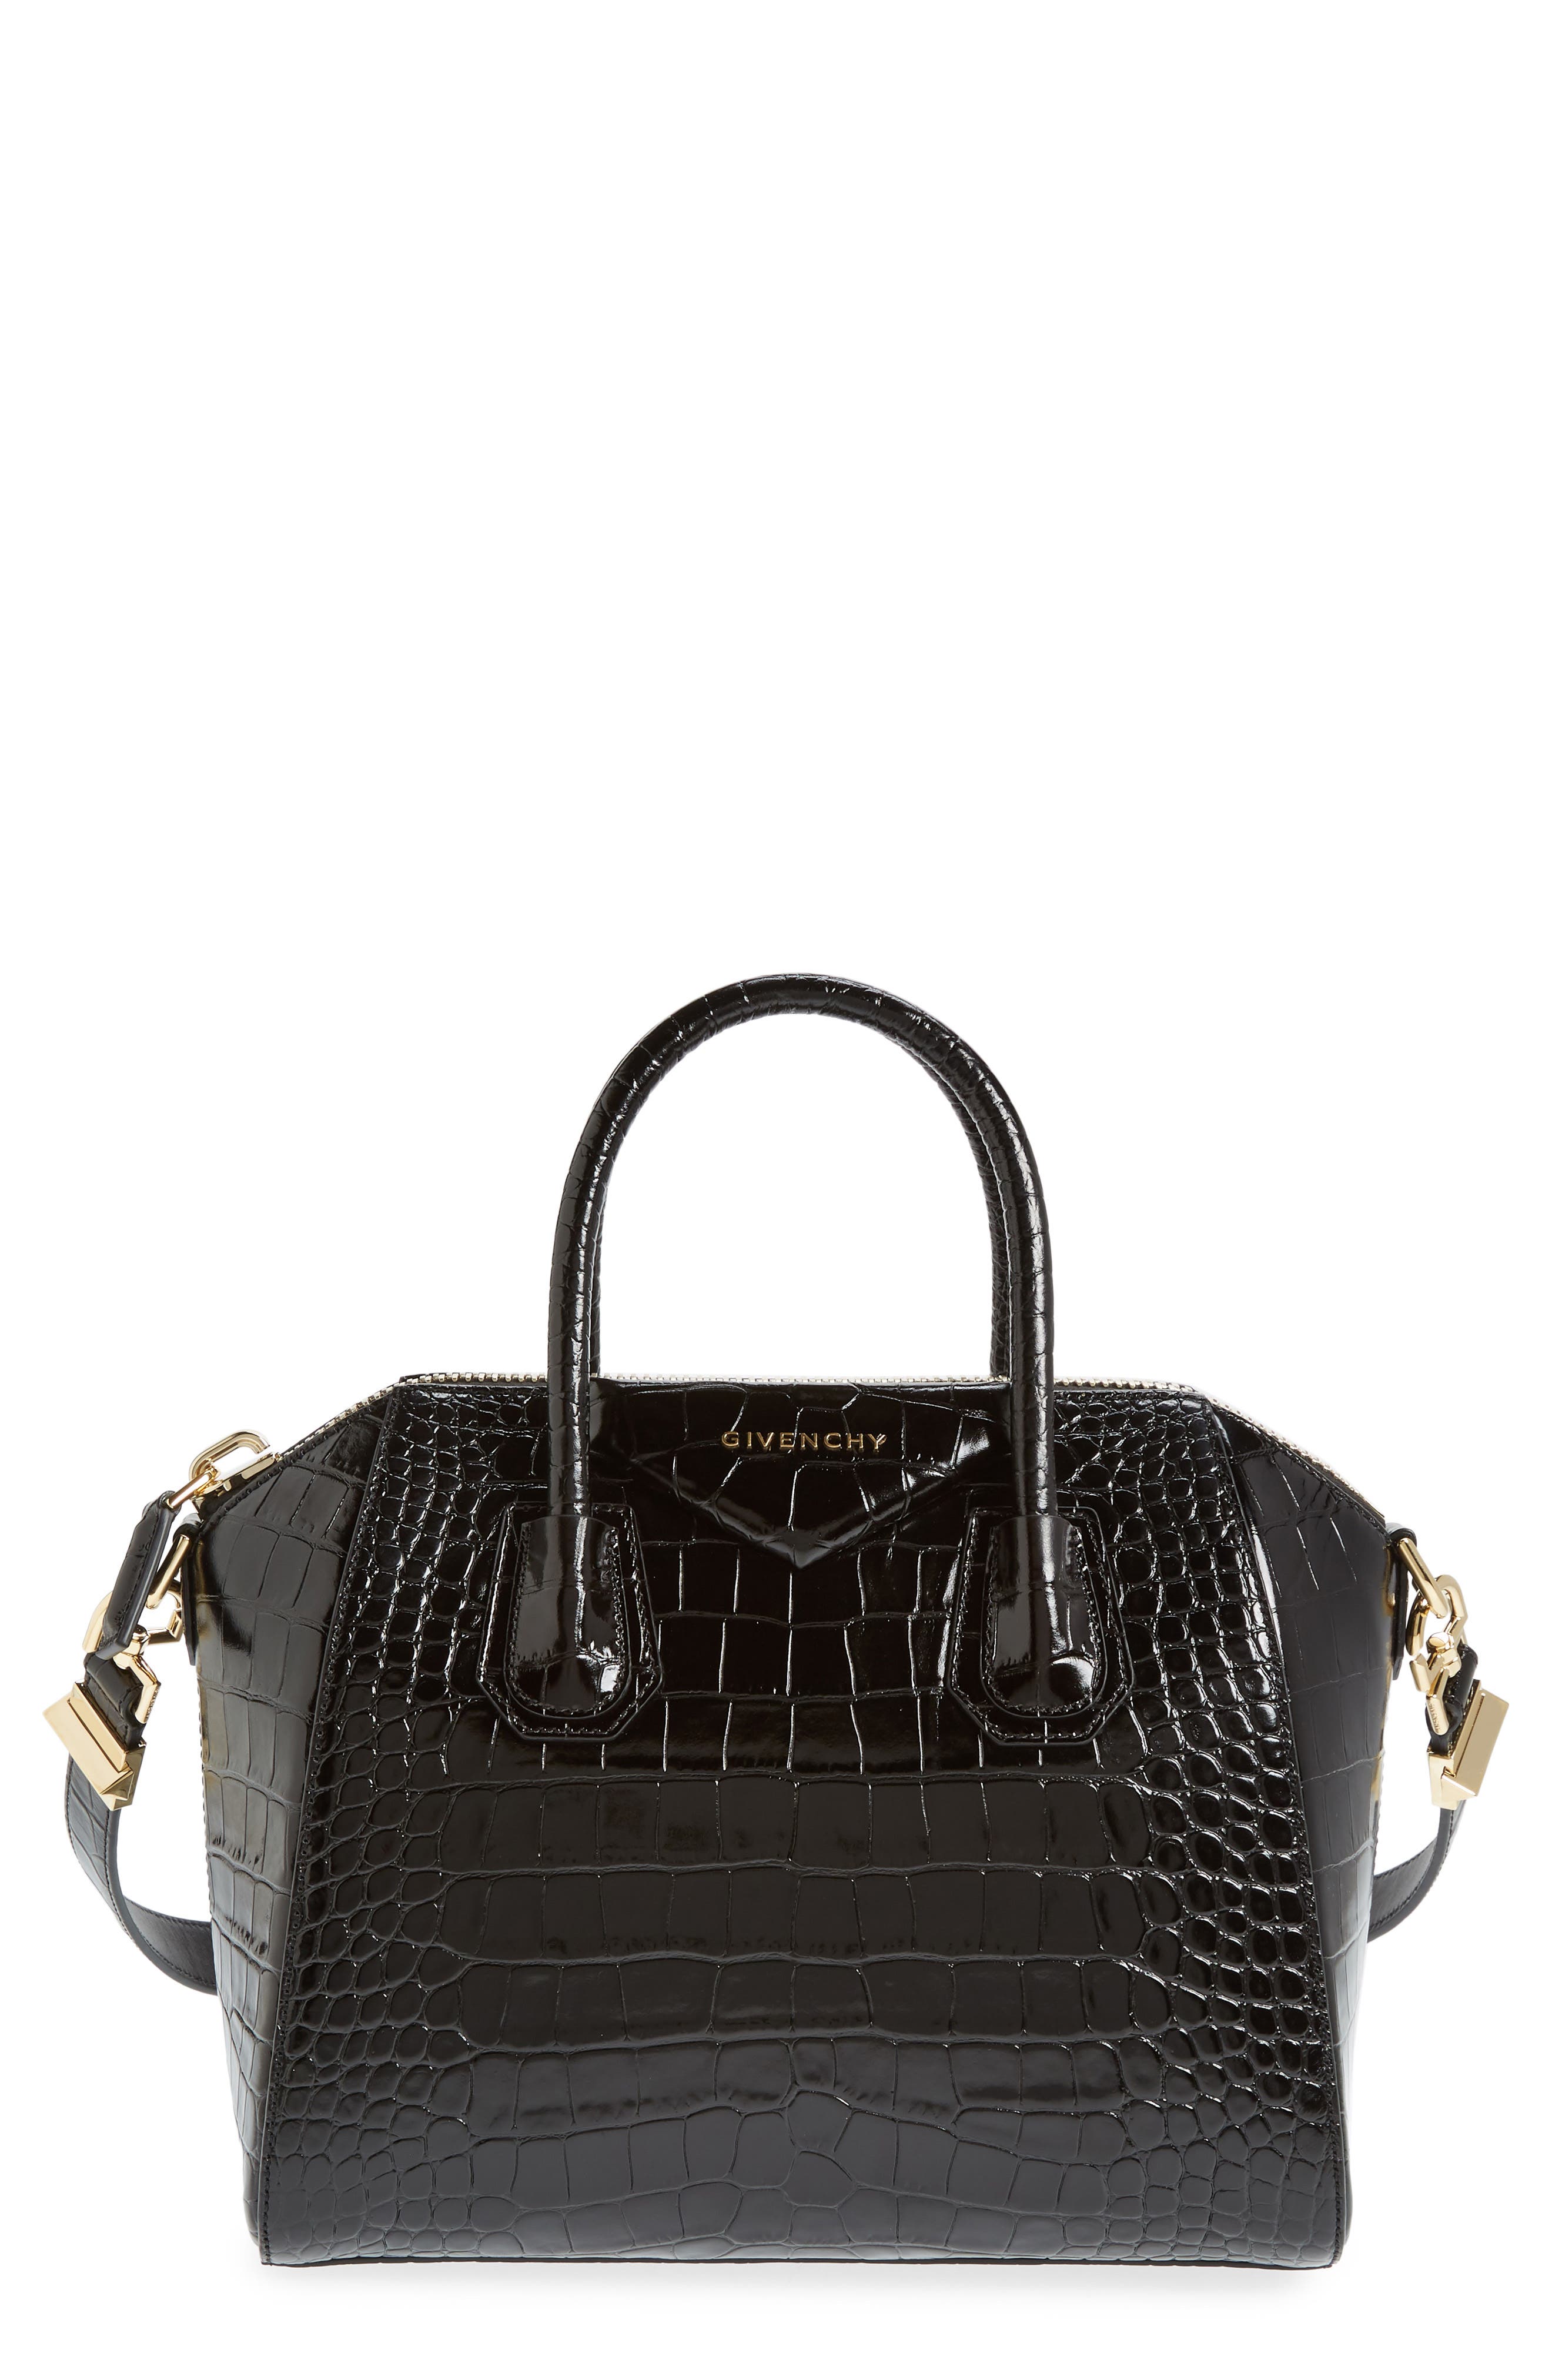 givenchy bags nordstrom